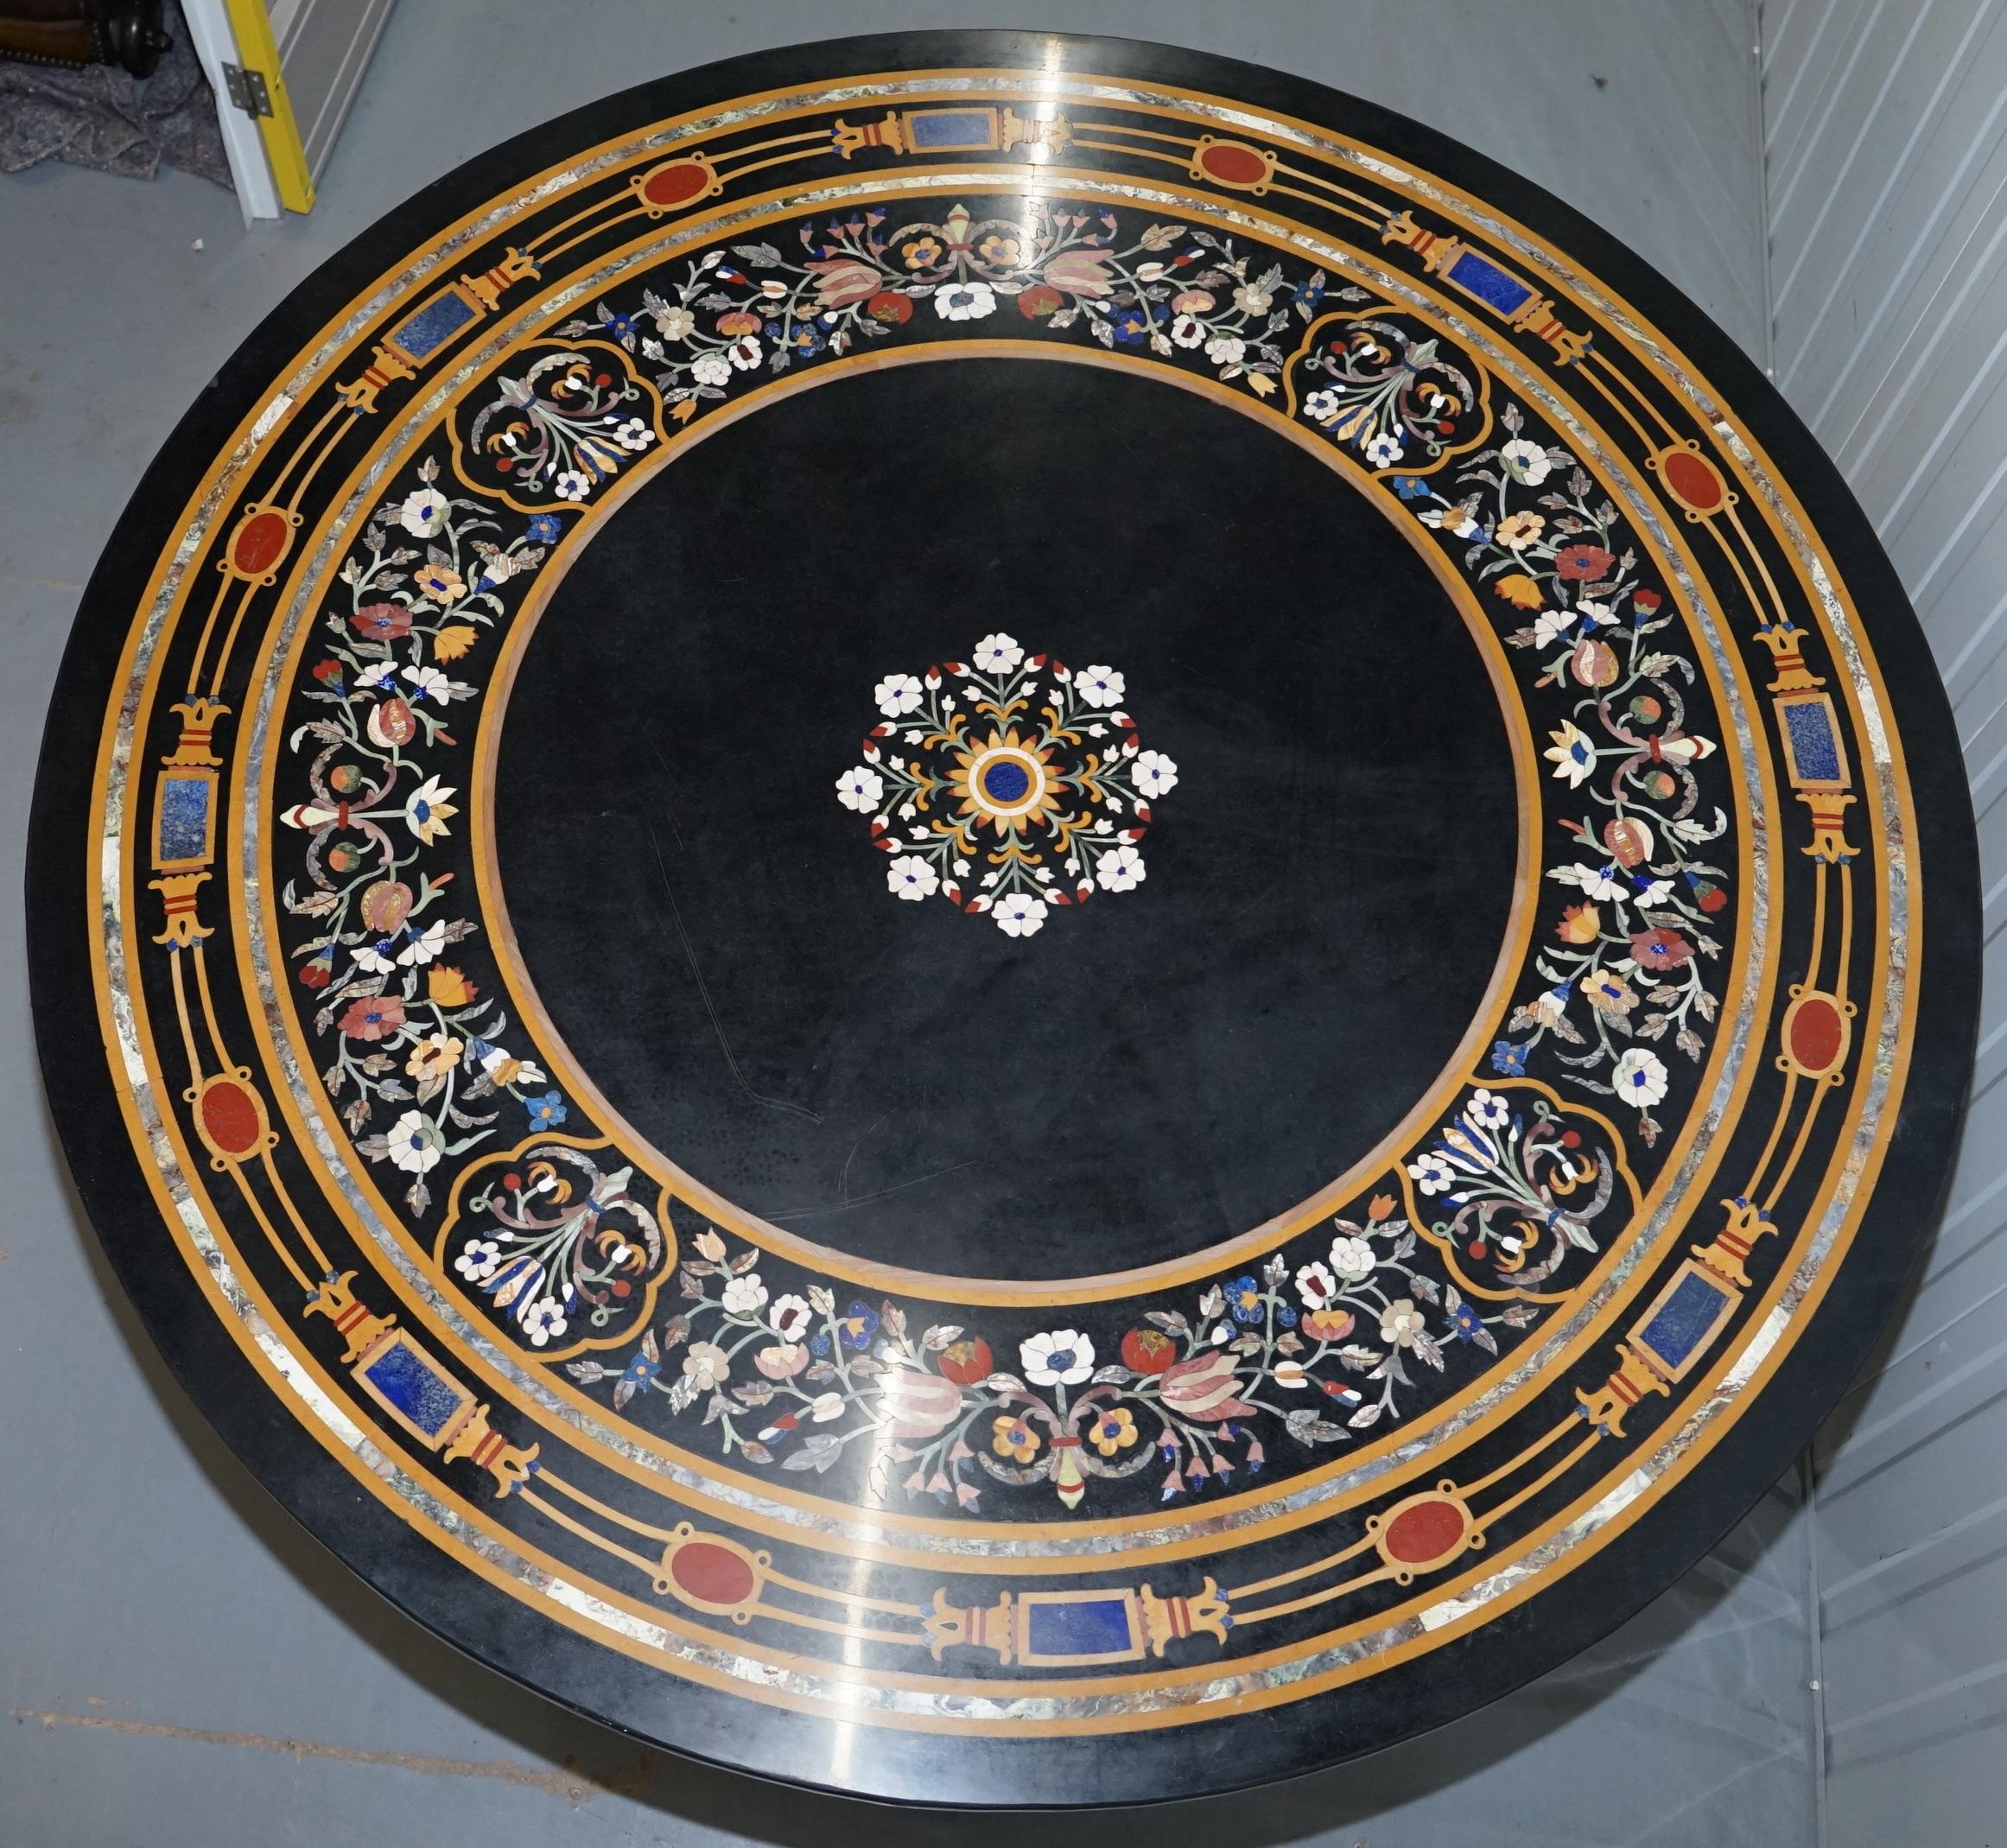 We are delighted to offer for sale this very ornate large round Pietra Dura specimen marble dining room table 

A very good looking heavy and substantial piece of decorative furniture, there are literally hundreds of cuts of marble each perfectly